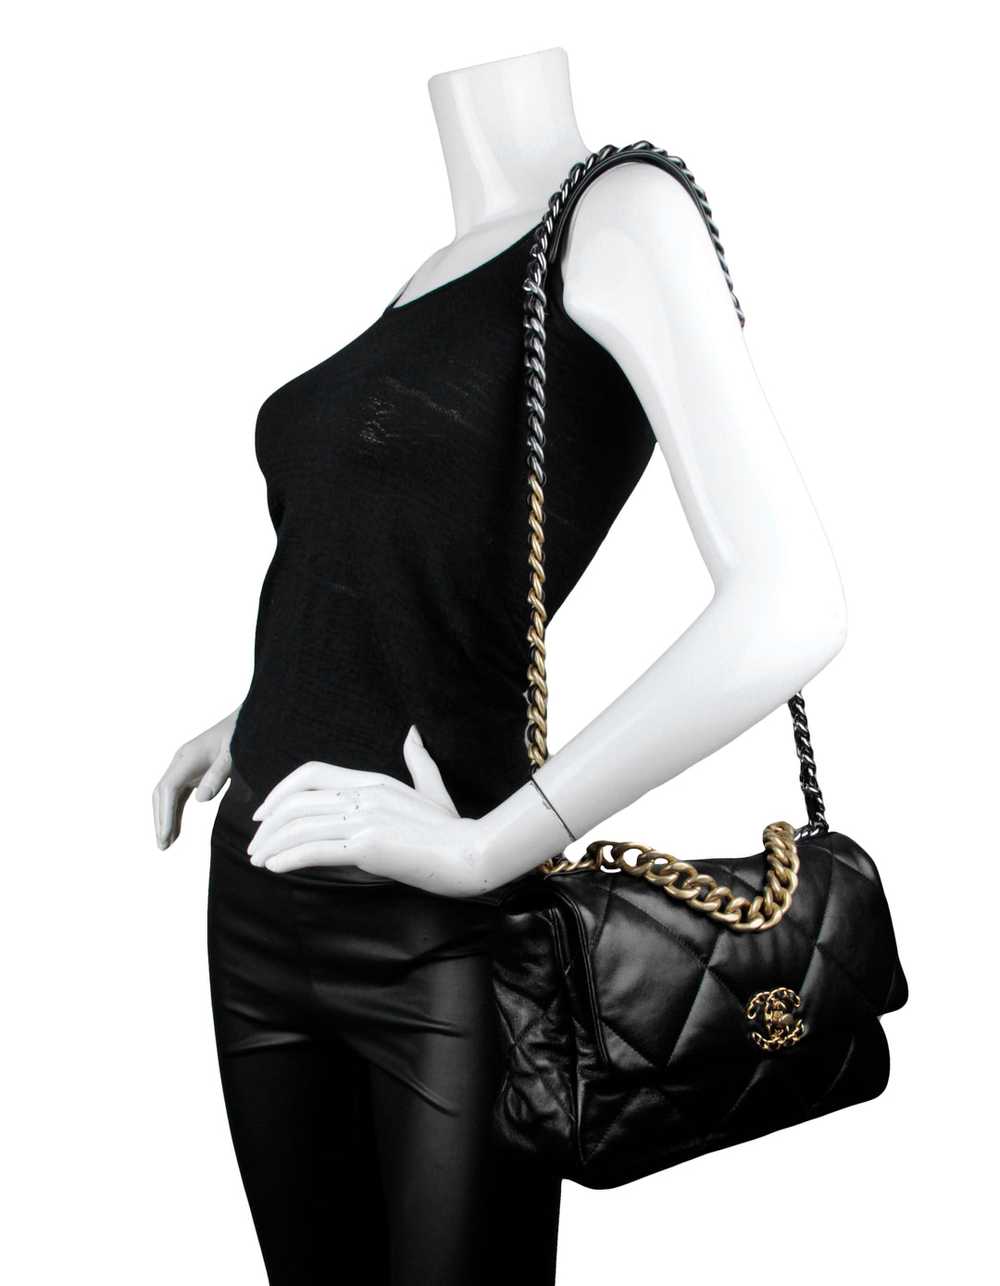 Chanel Black Lambskin Leather Quilted Large 19 Bag - image 9